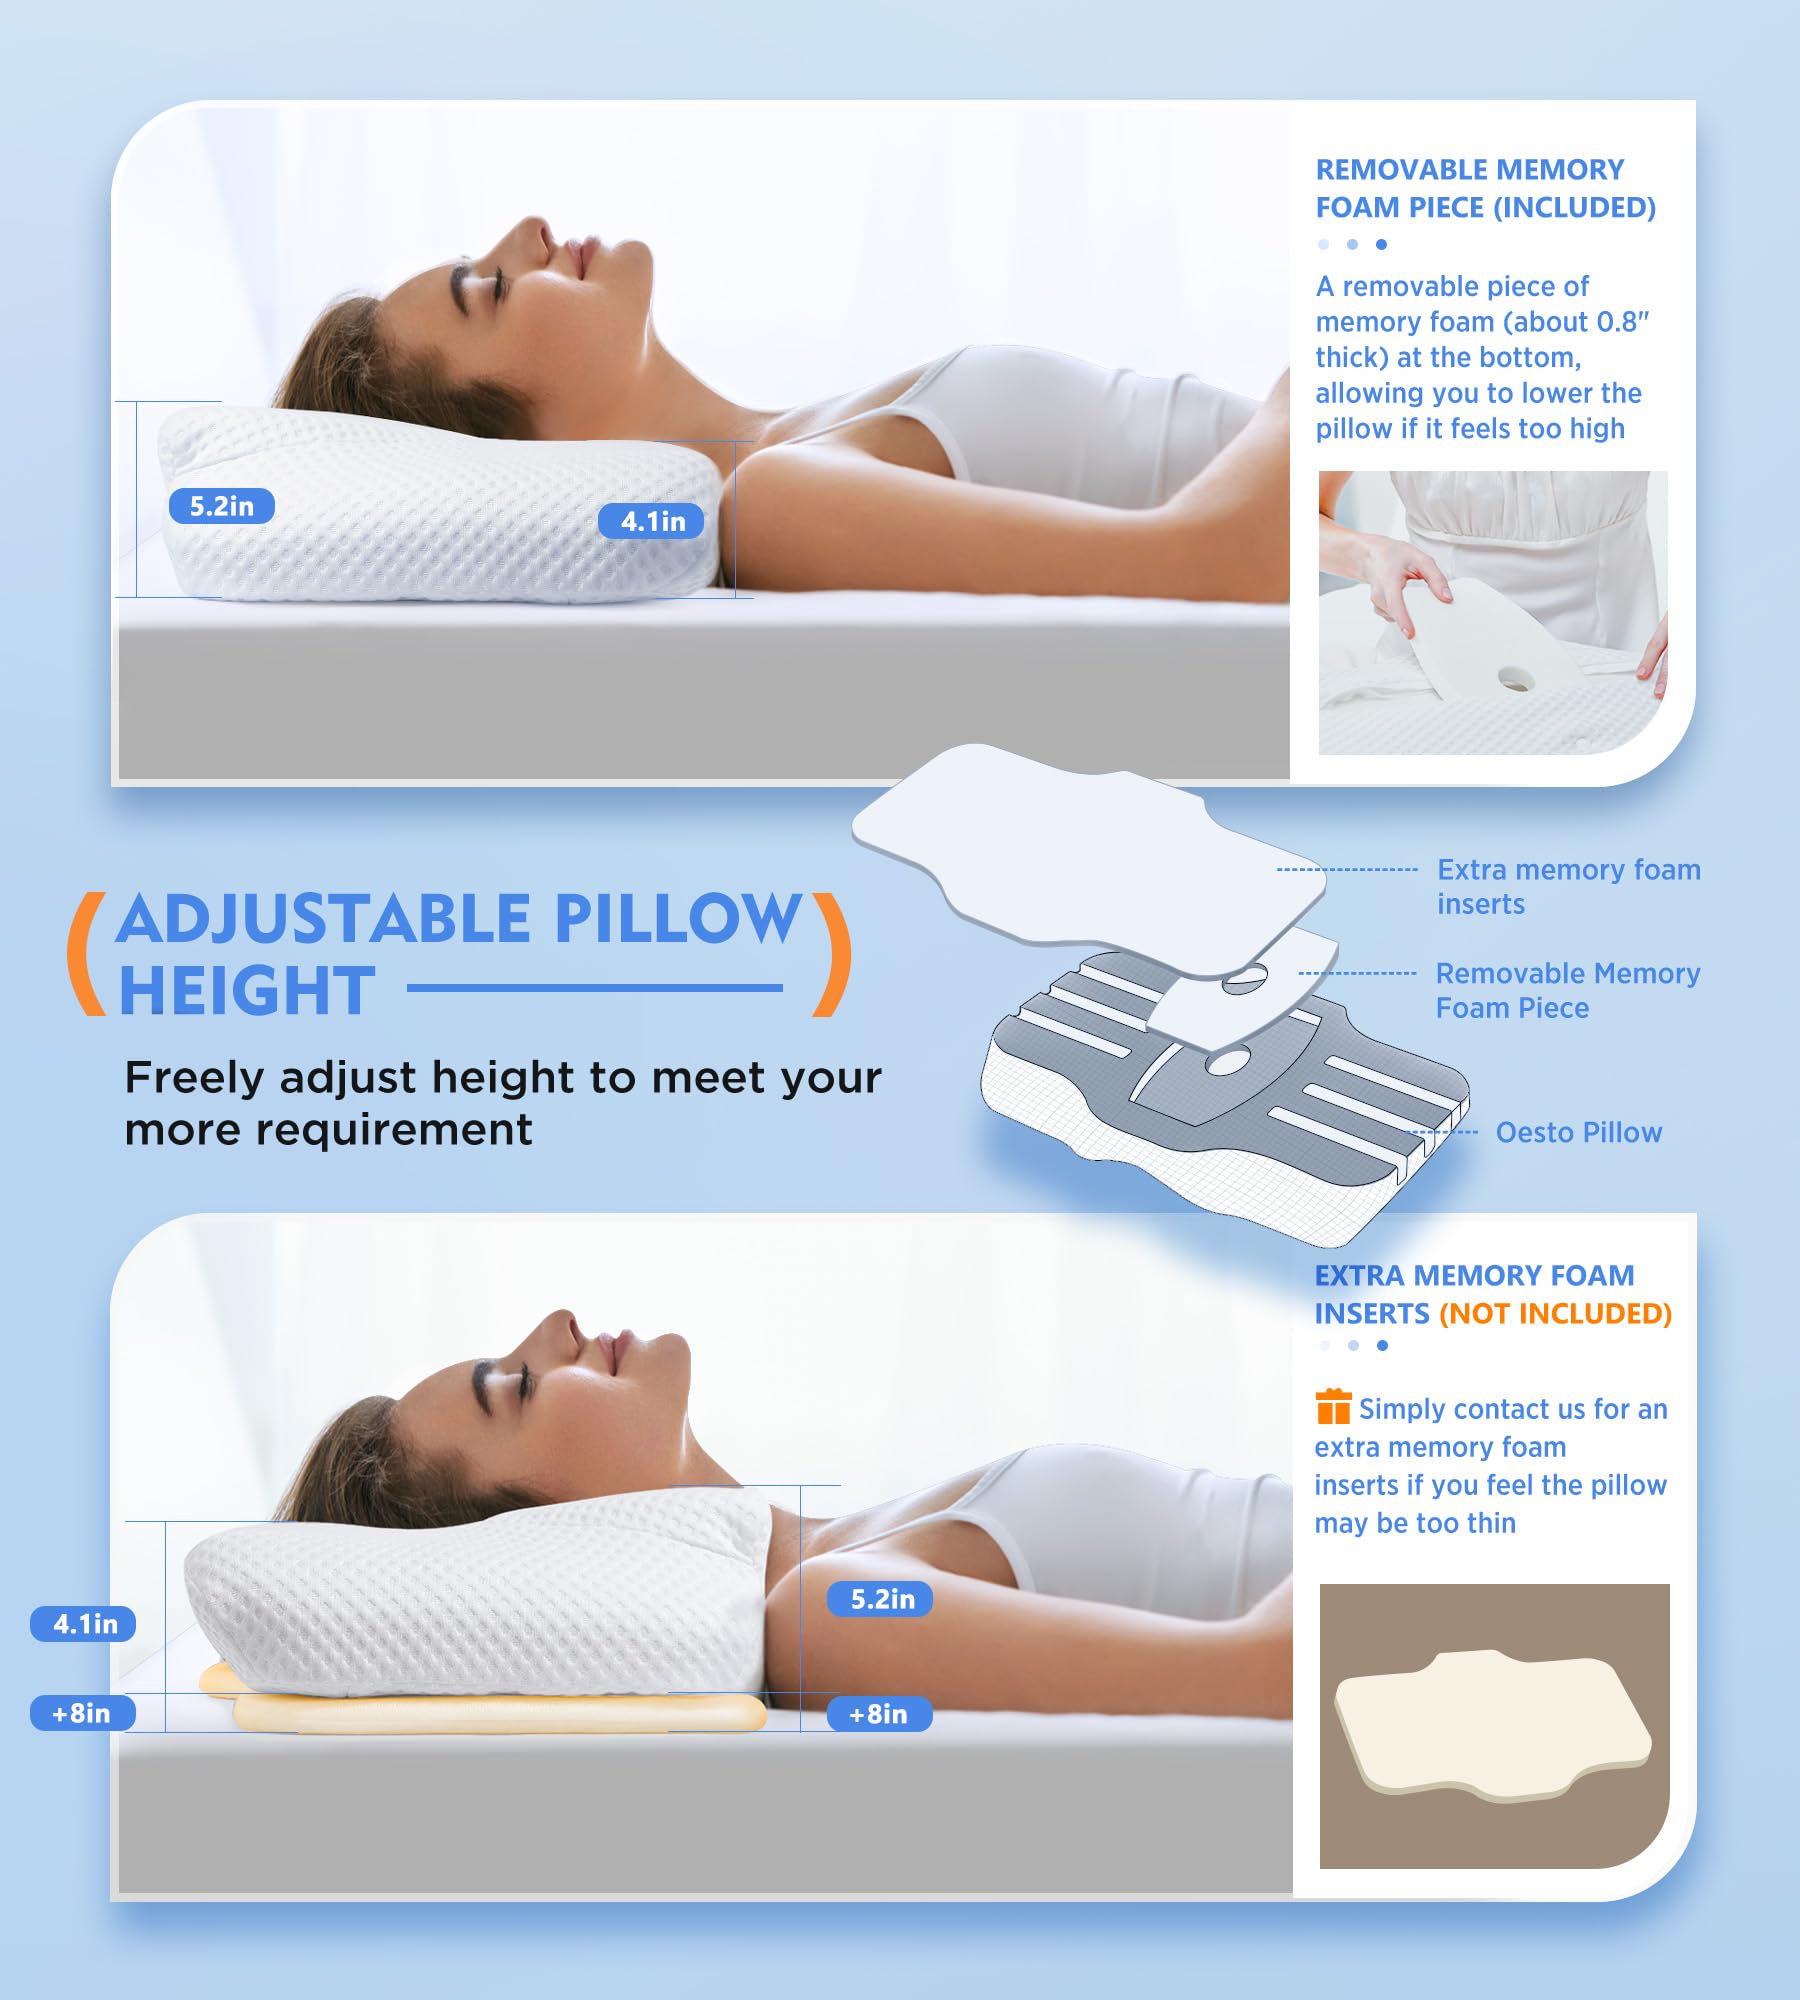 Osteo Cervical Pillow for Neck Pain Relief, Hollow Design Odorless Memory Foam Pillows with Cooling Case, Adjustable Orthopedic Bed Pillow for Sleeping, Contour Support for Side Back Stomach Sleepers